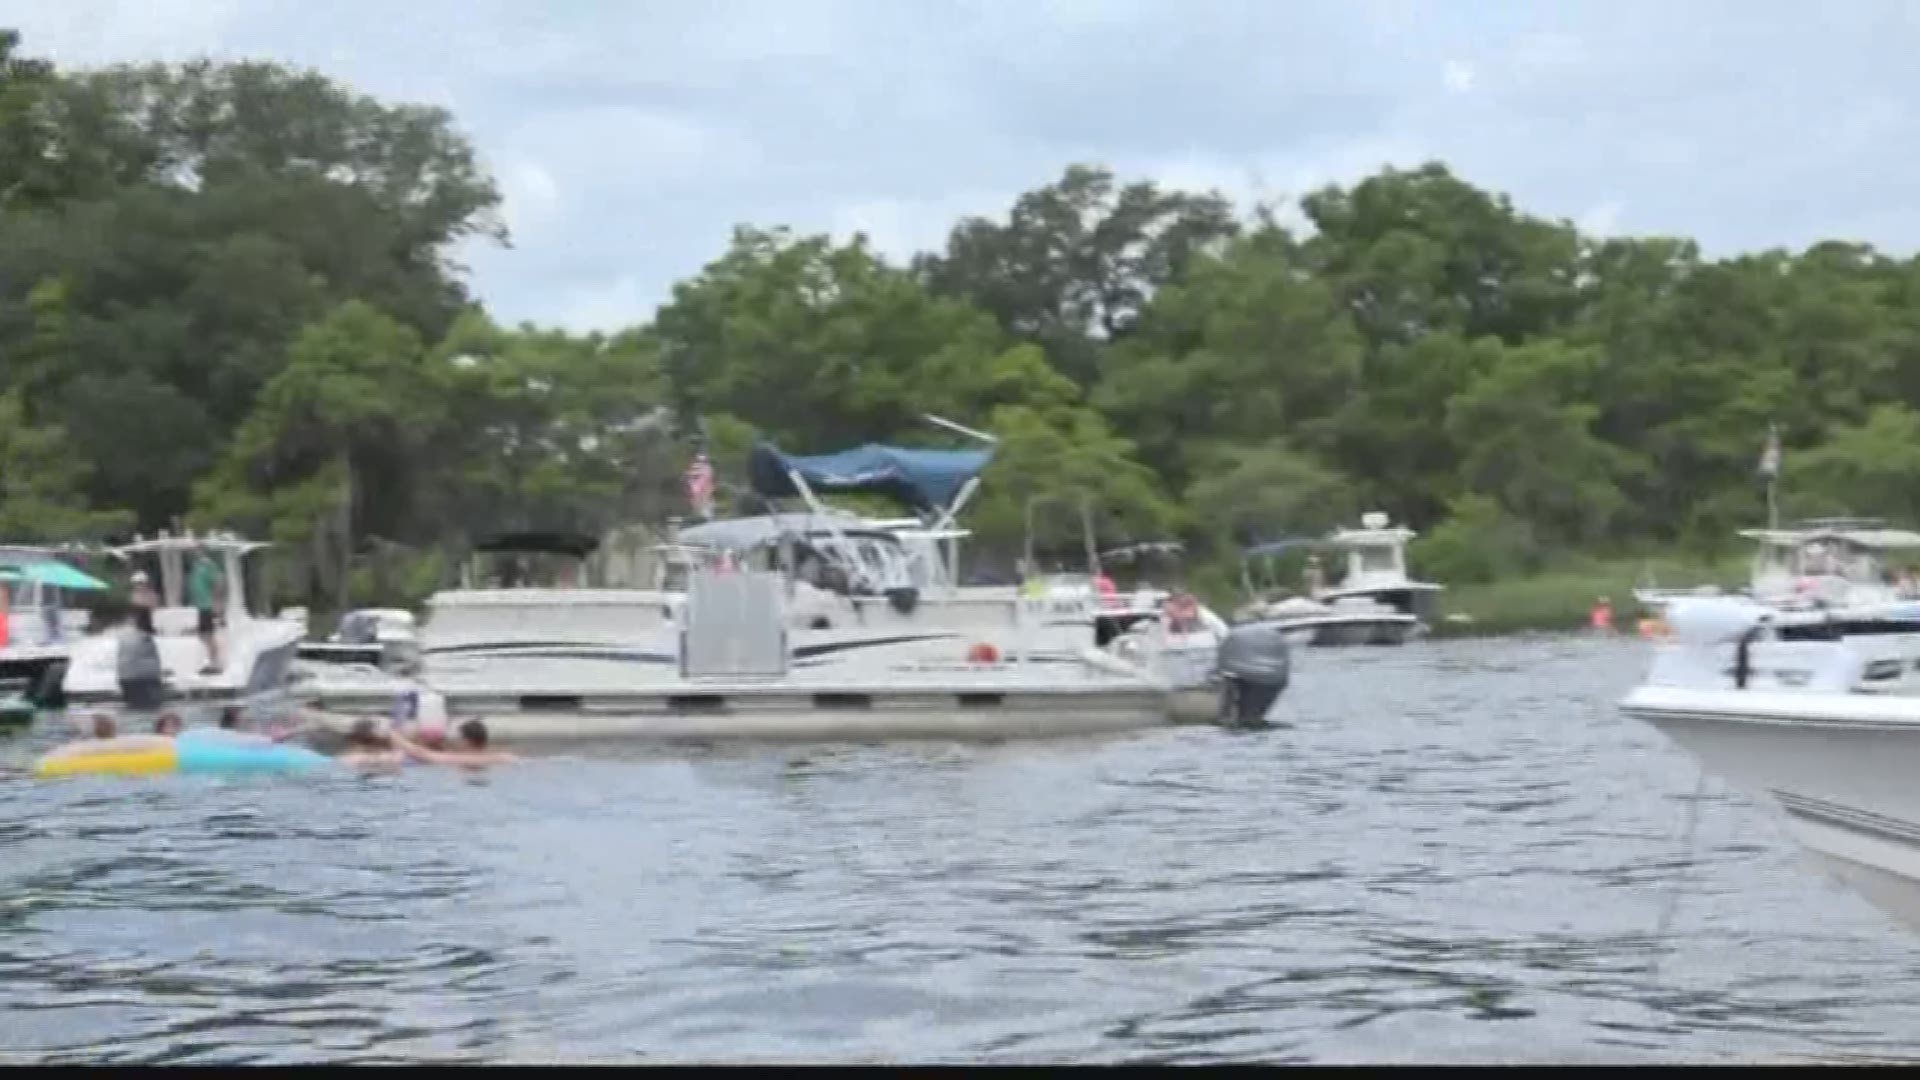 Lisa with the Freedom Boat Club told First Coast News Reporter Lana Harris how the "boater skip day" came to be.